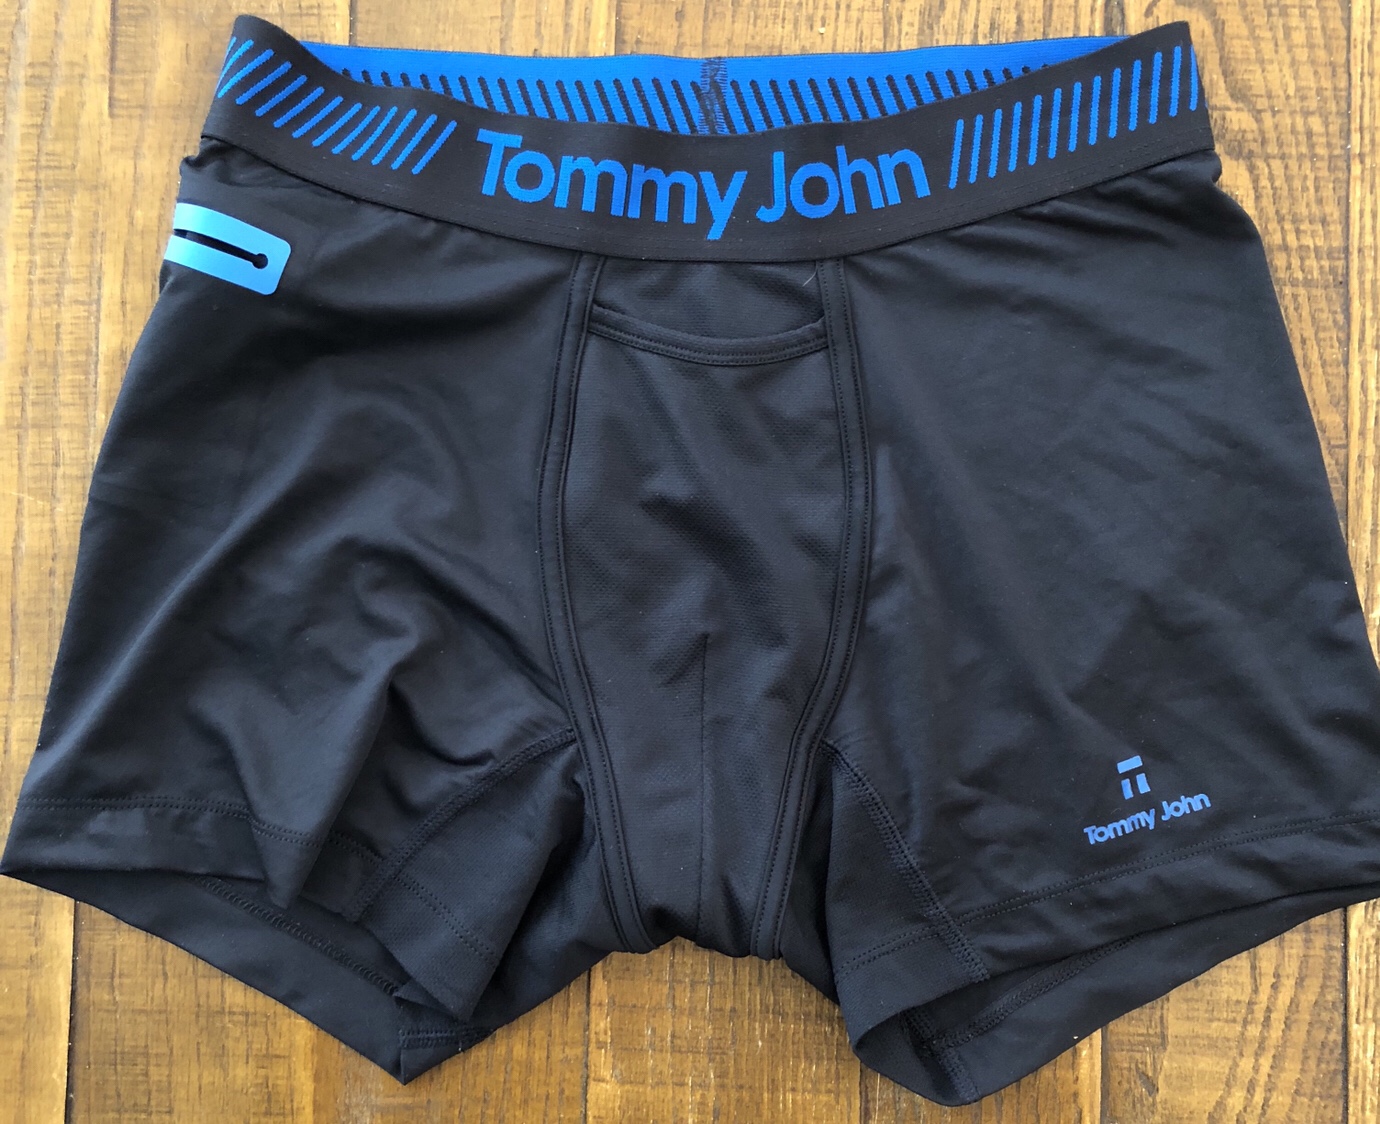 Tommy John Underwear Reviewing - Dr. Nick's Running Blog